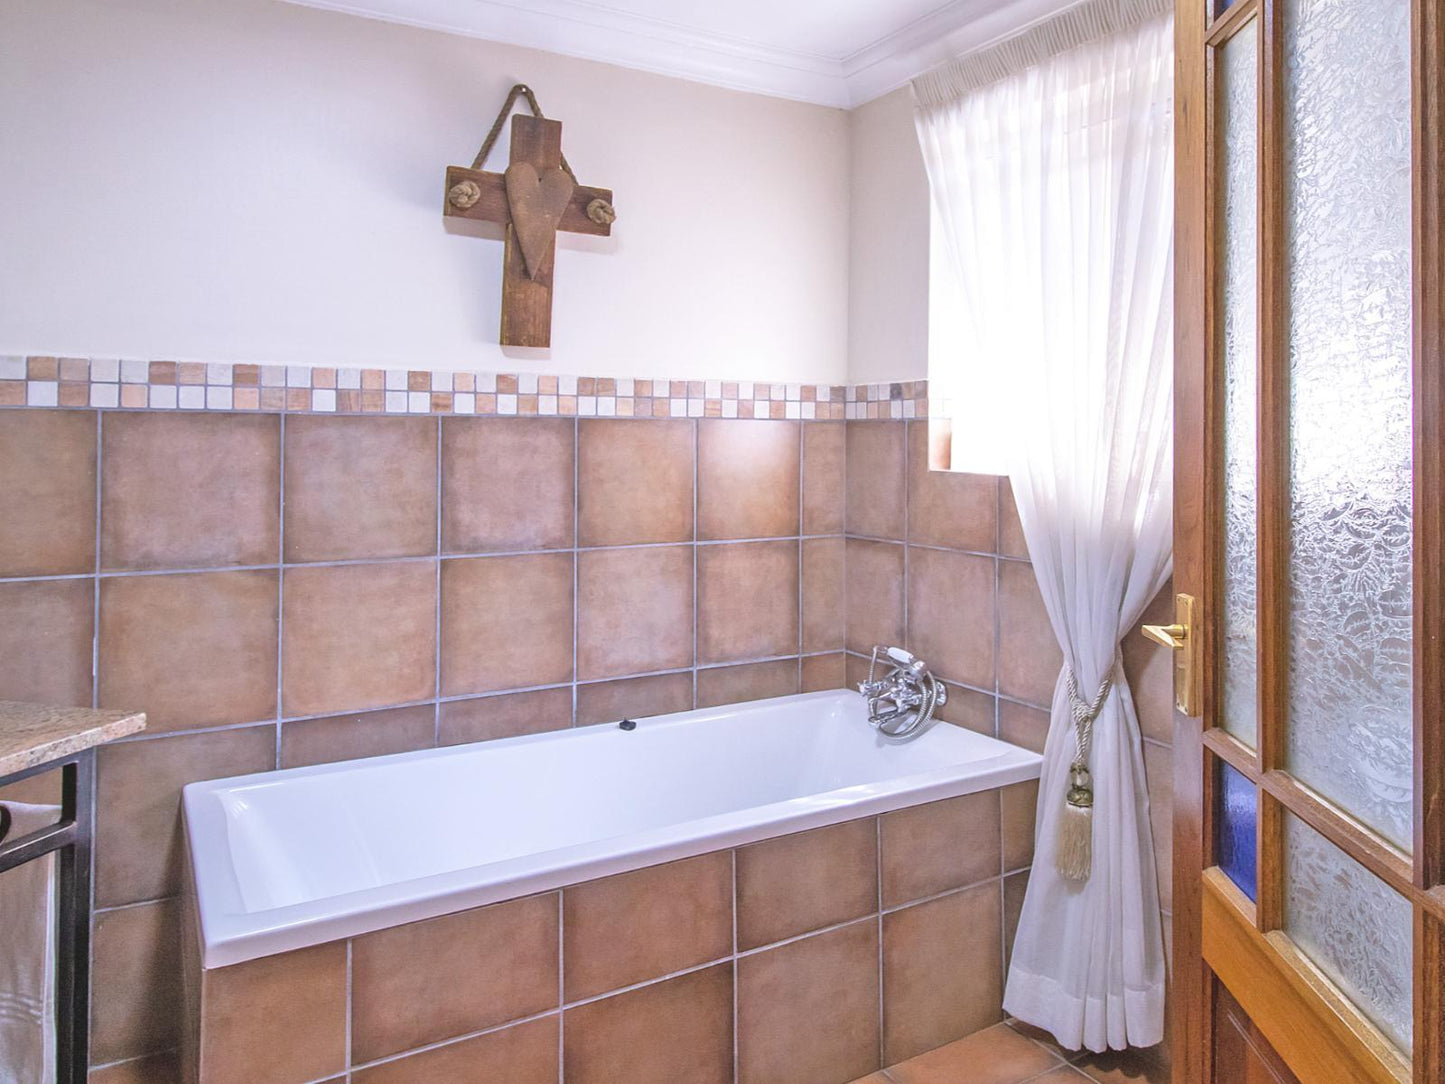 Executive Rooms @ Sunward Park Guesthouse & Conference Centre